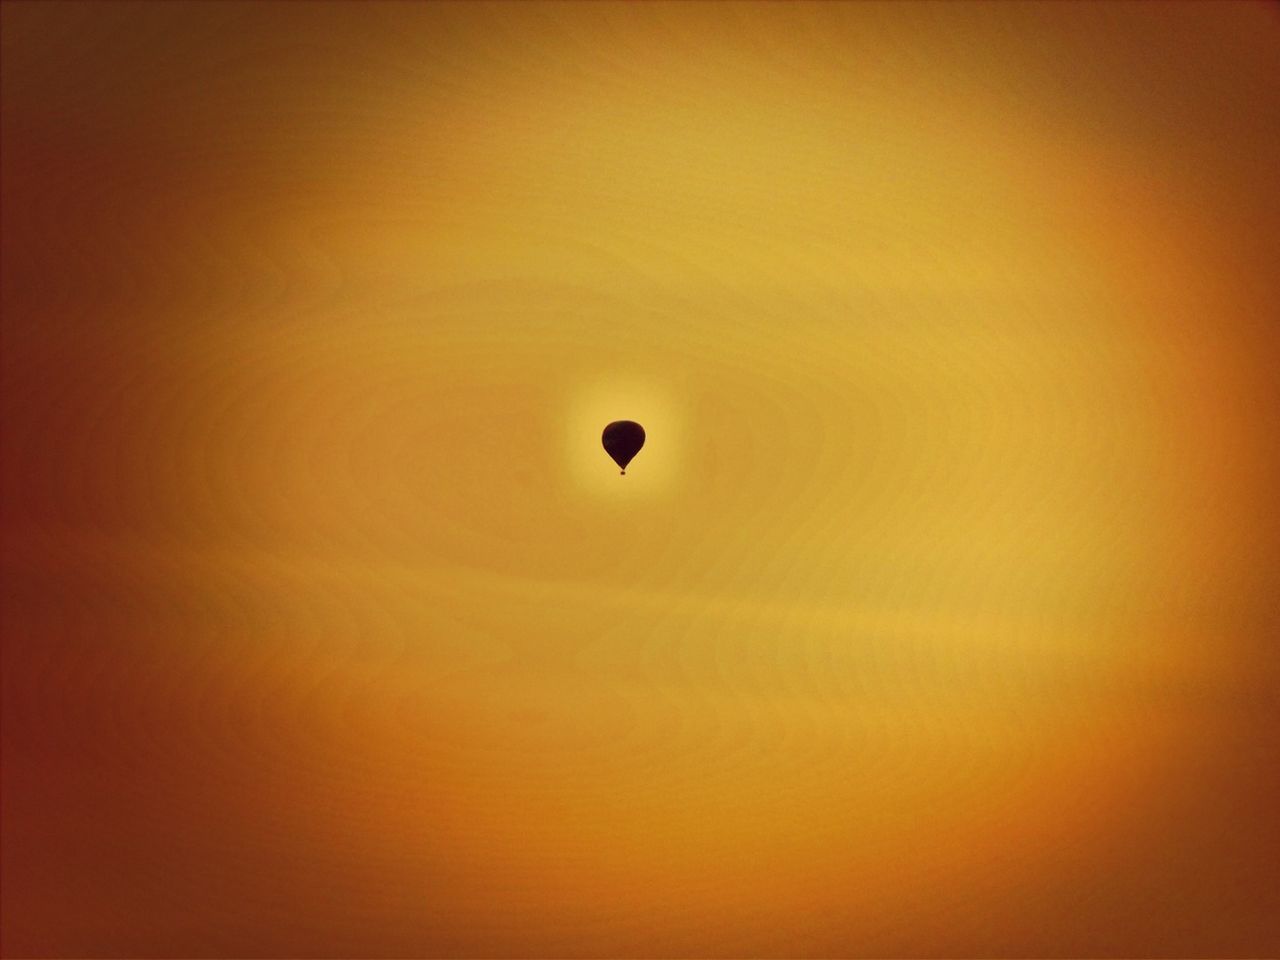 Low angle view of silhouette hot air balloon in orange sky